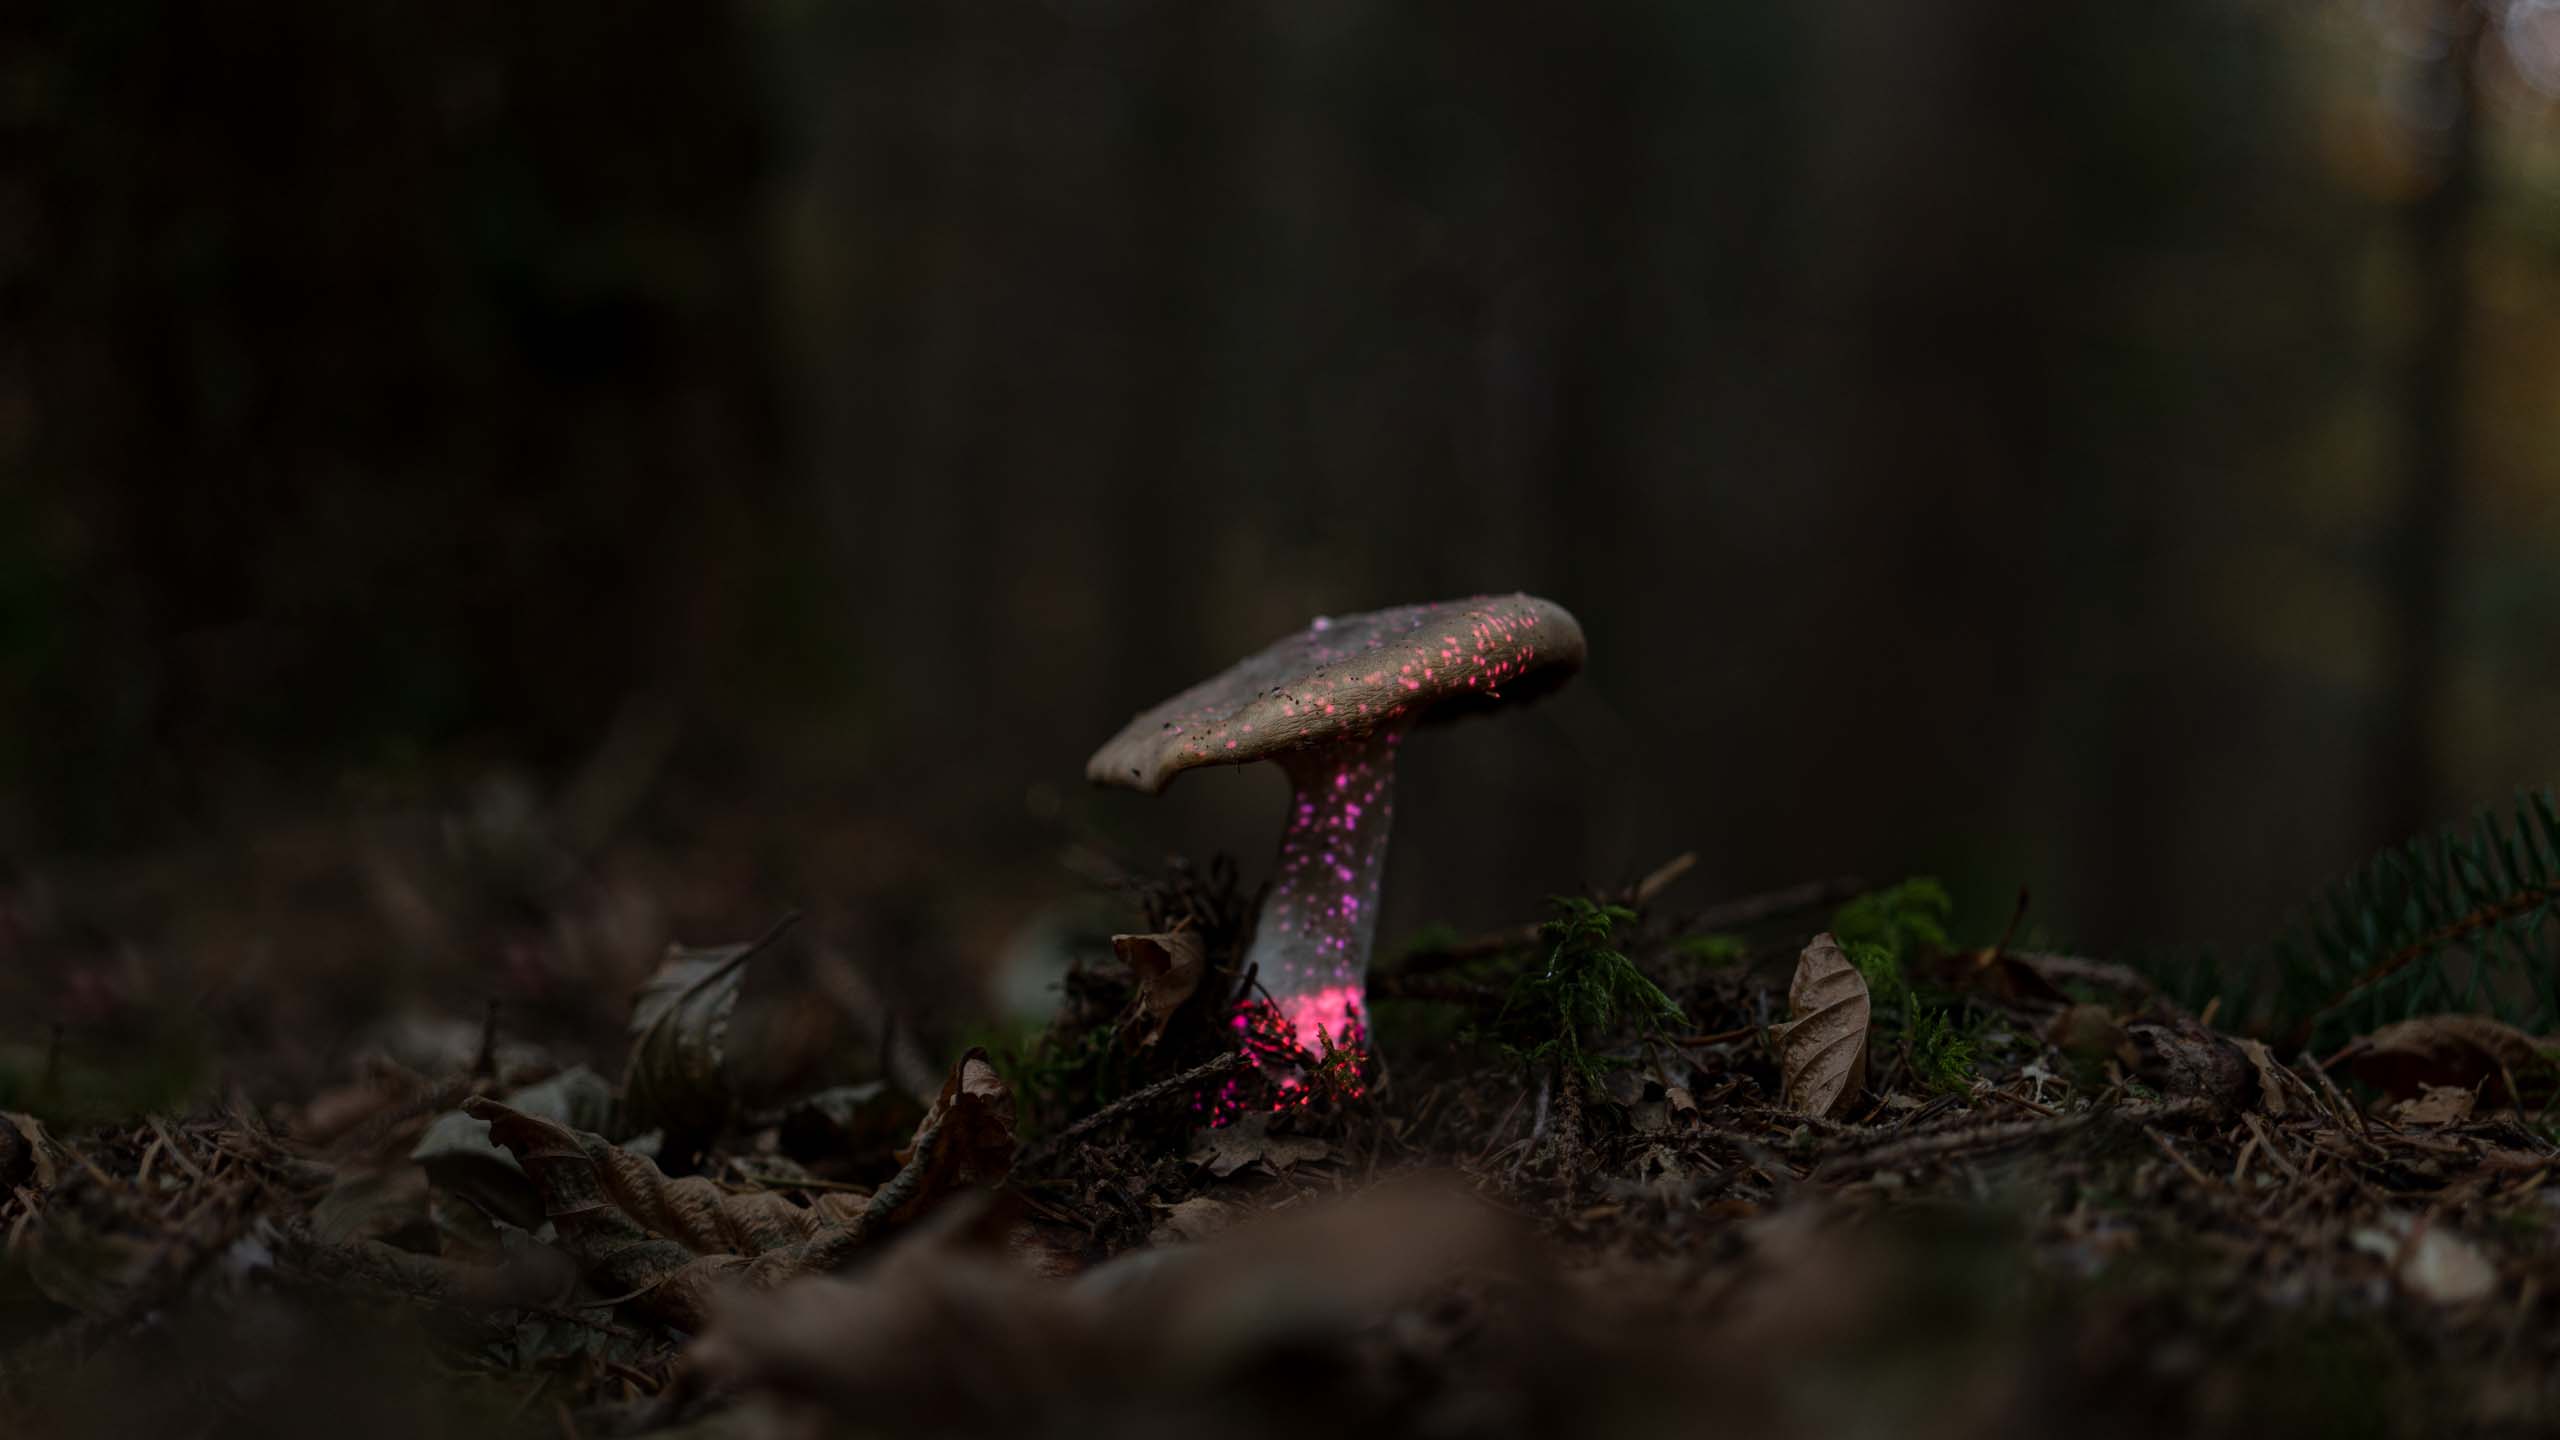 Projection Mapping on a Mushroom